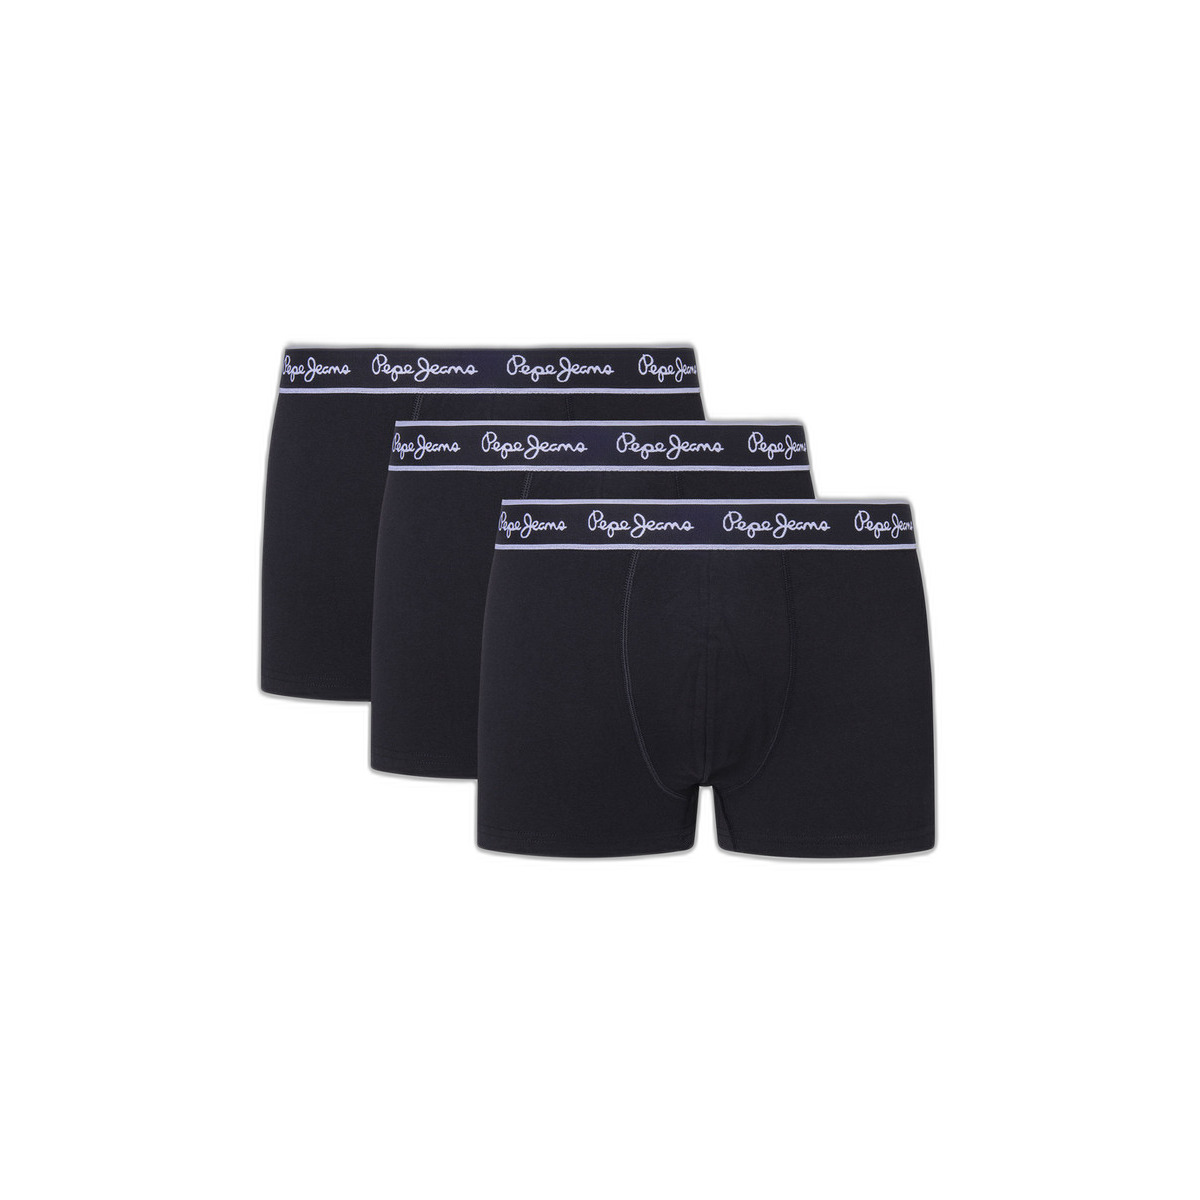 boxers pepe jeans (x3)